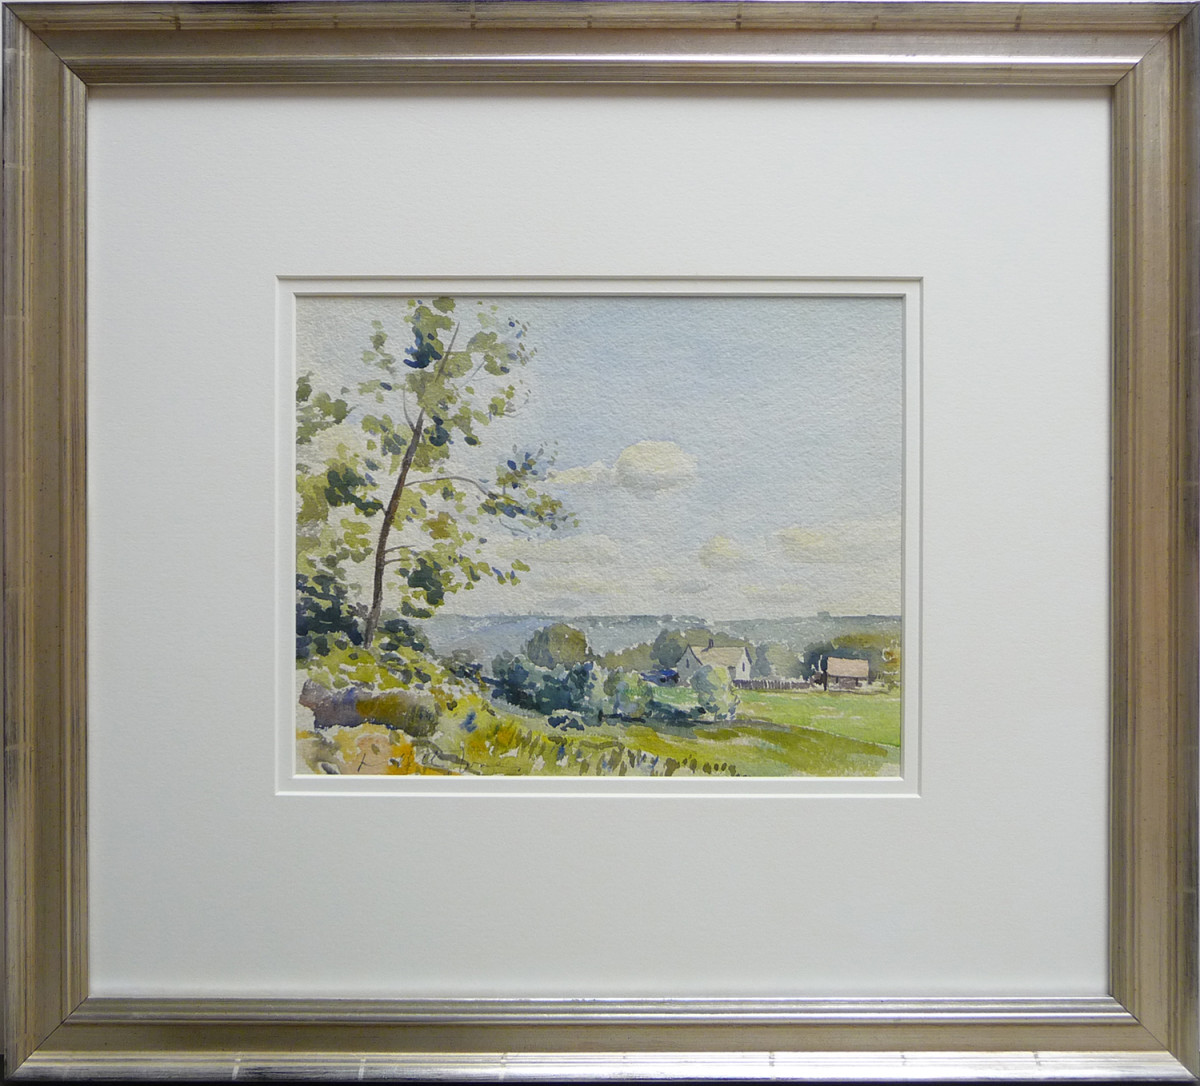 2363 - The View from the Garden by Llewellyn Petley-Jones (1908-1986) 